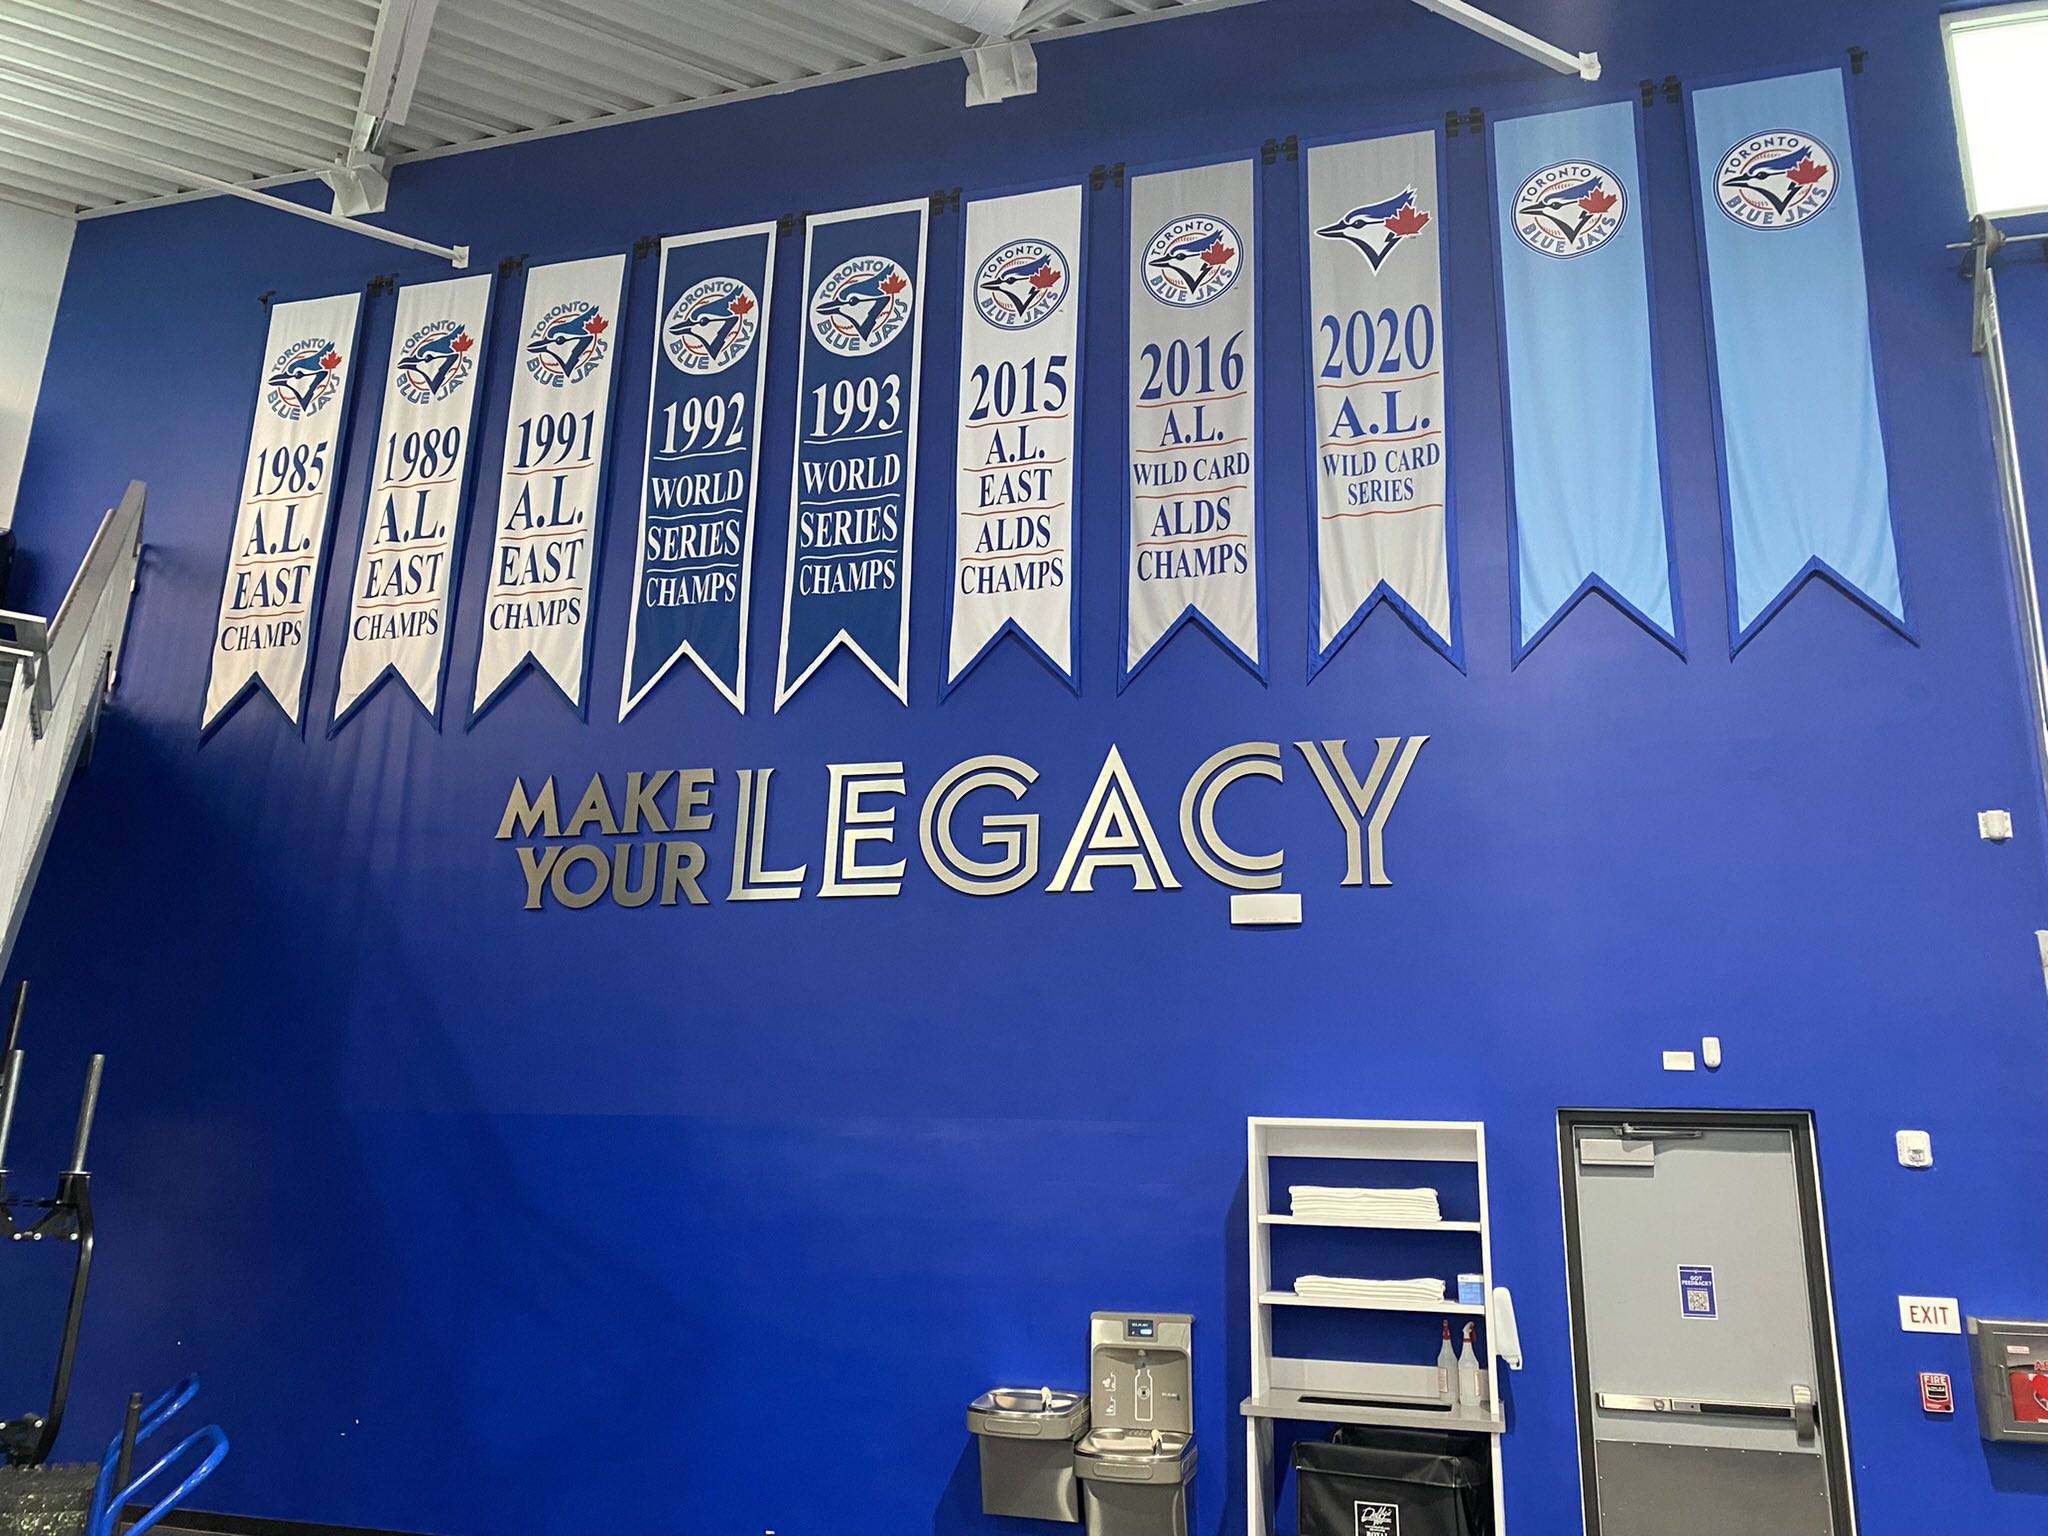 blue jays banners 2022